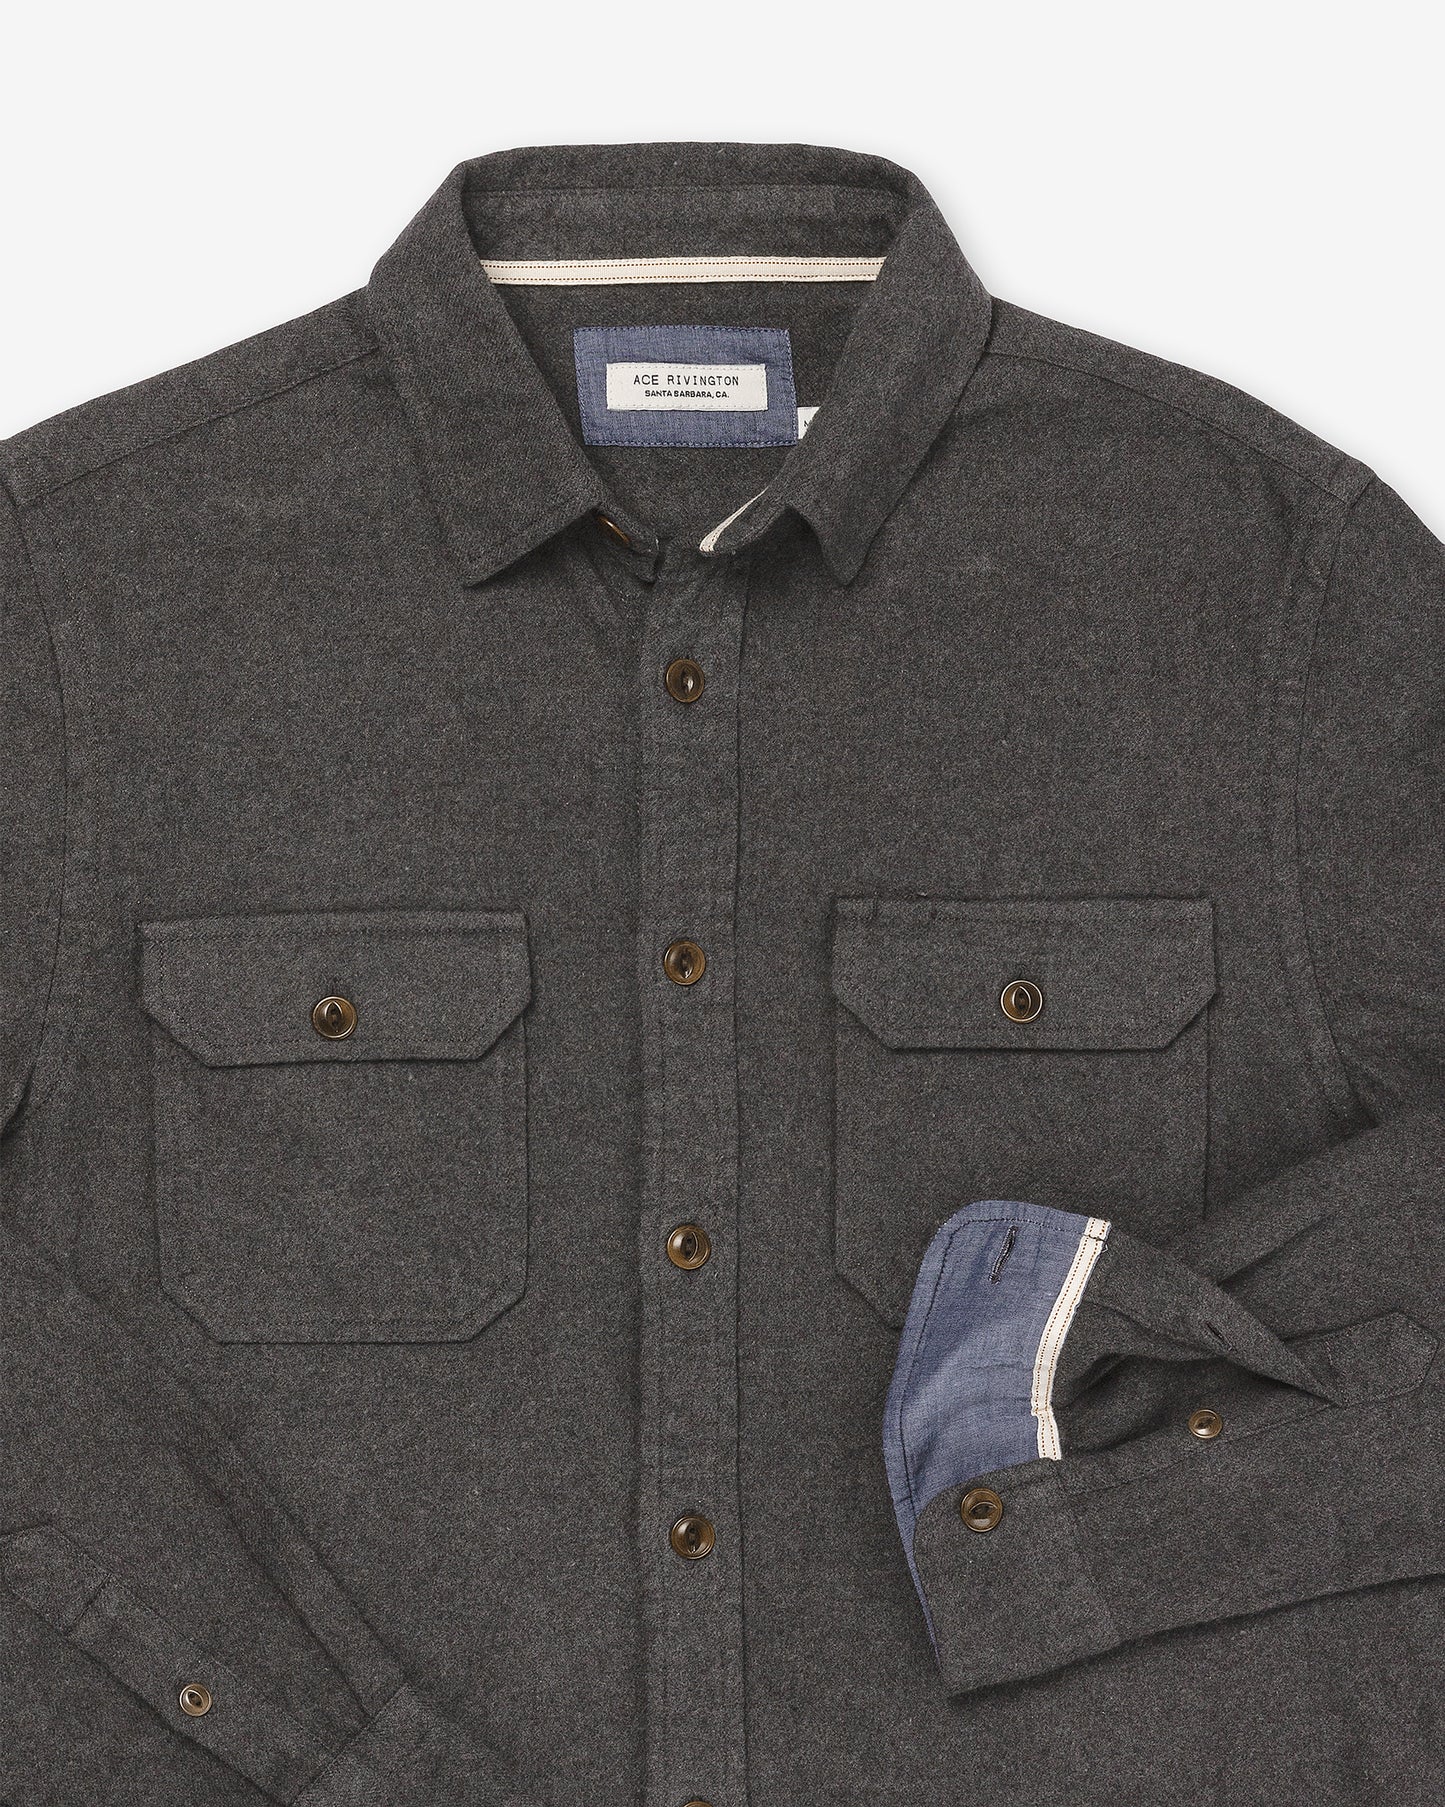 Flannel Shirt - Charcoal Heather H1